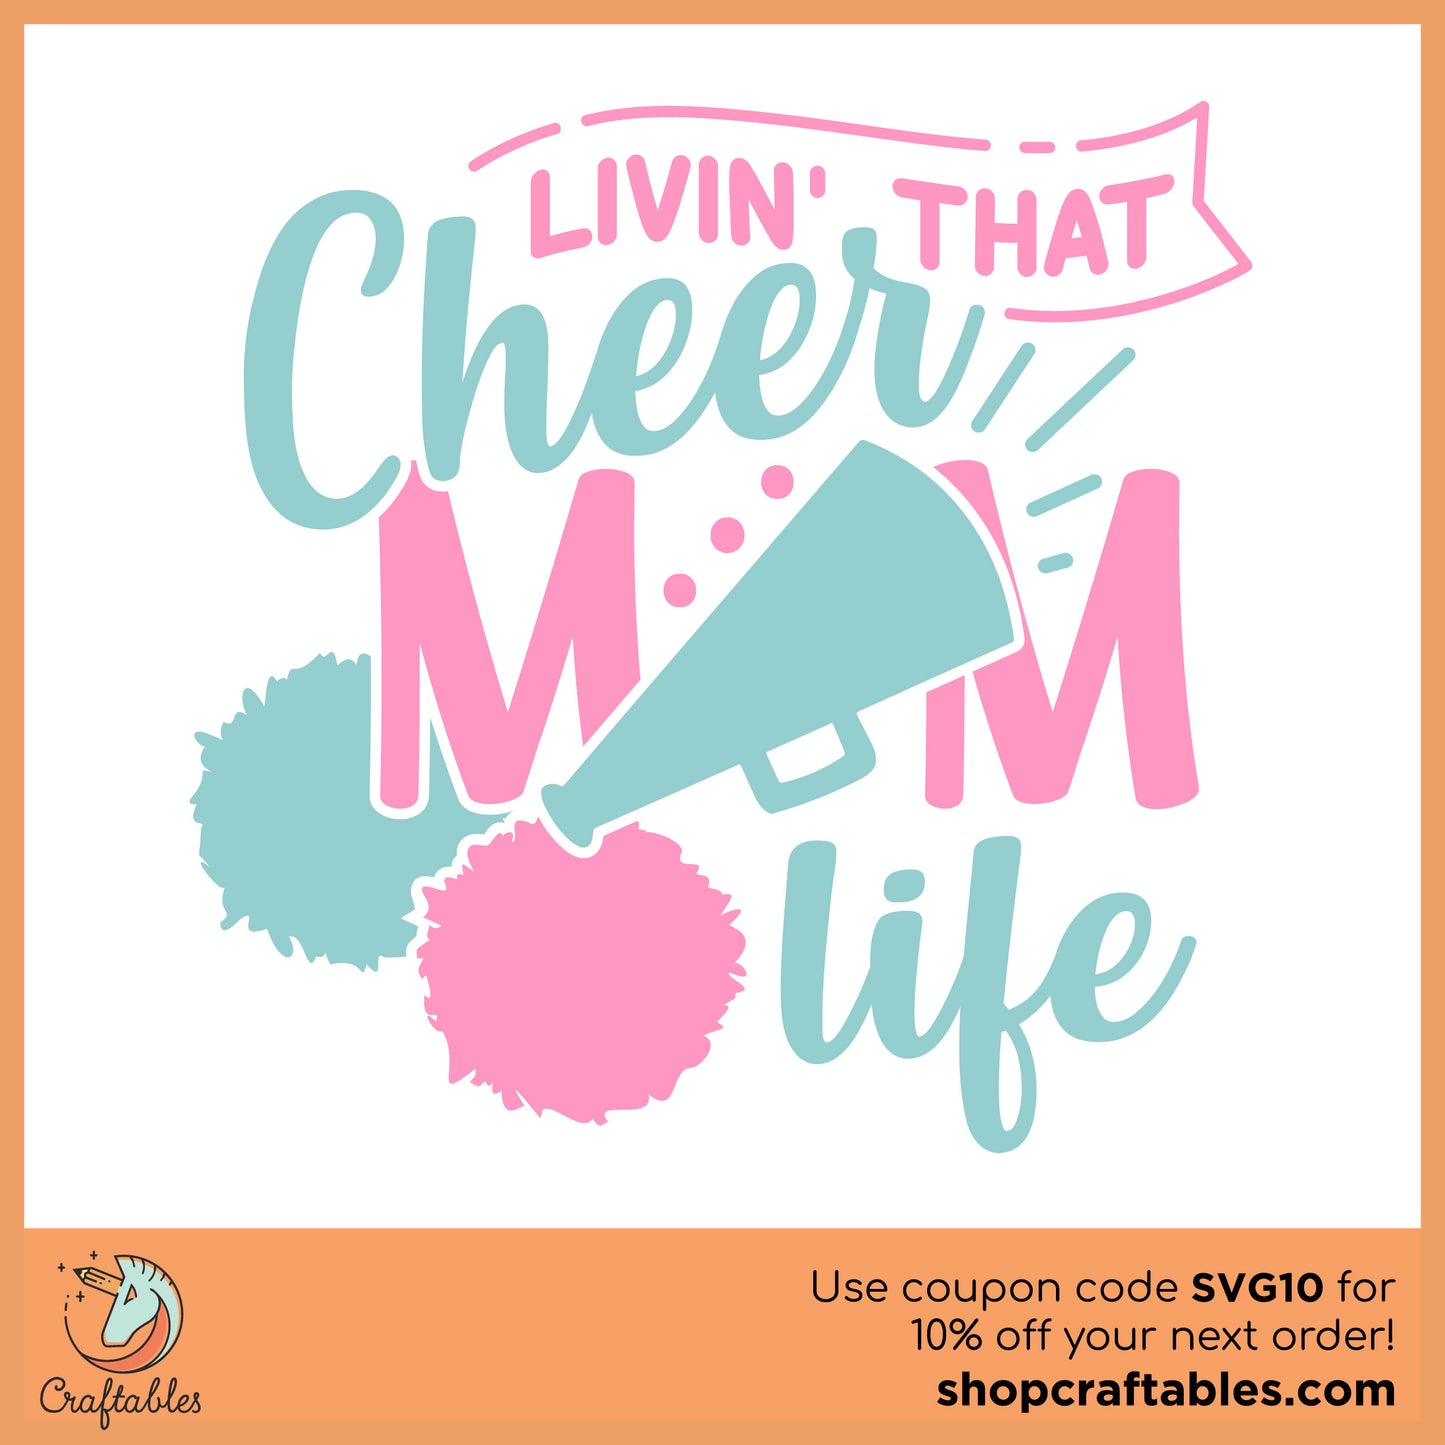 Free Livin That Cheer Mom Life SVG Cut File